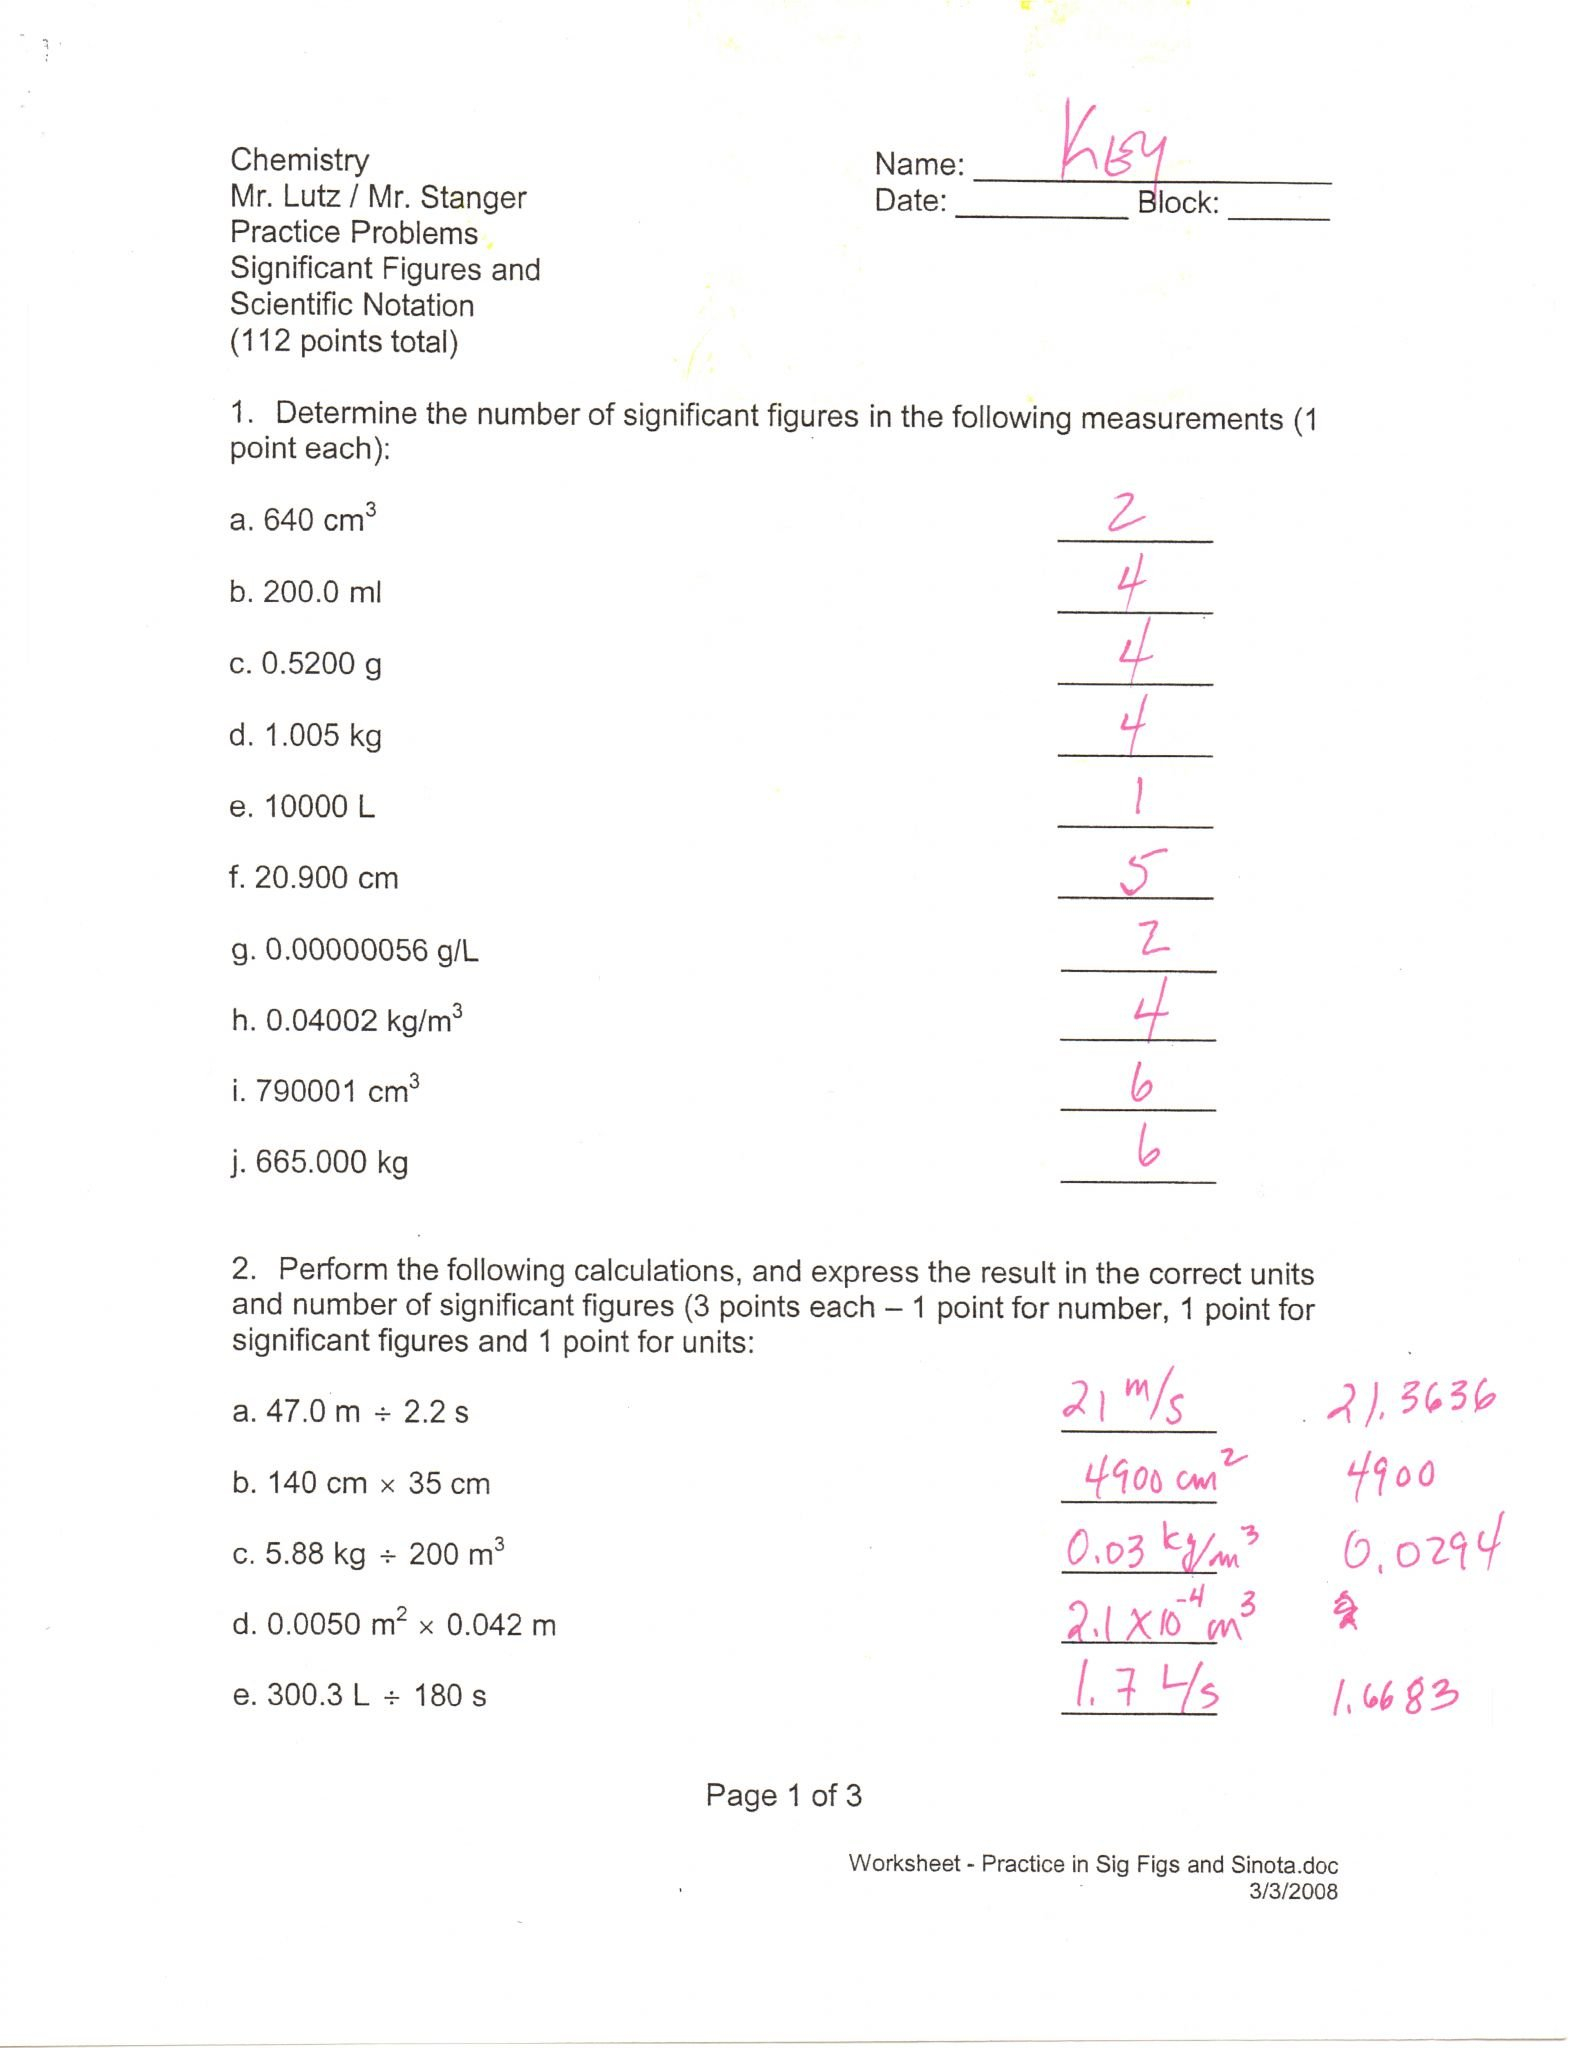 Worksheet 2 Scientific Notation Answers  Briefencounters Also Worksheet 2 Scientific Notation Answers